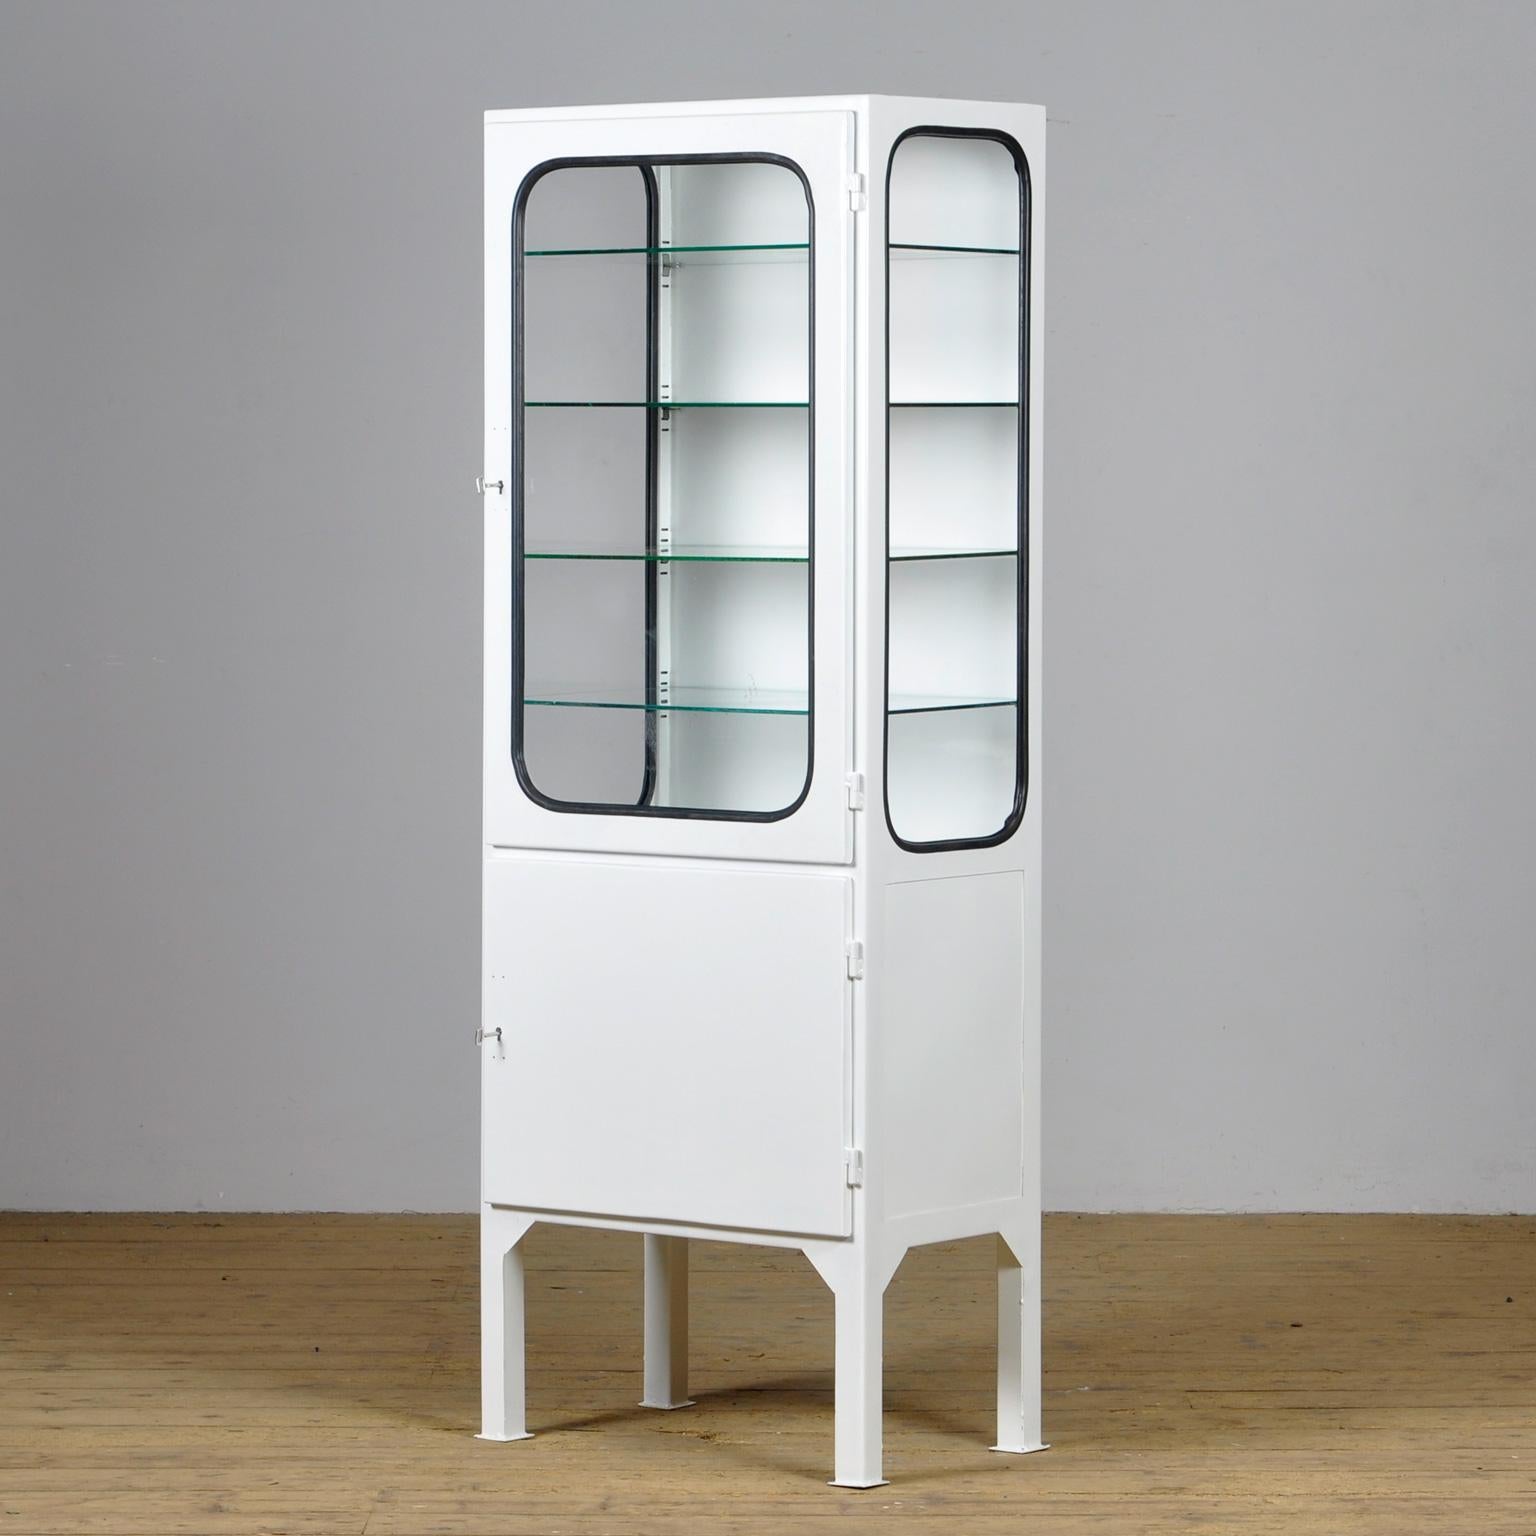 Hungarian Restored Vintage Iron And Glass Medical Cabinet, 1970s